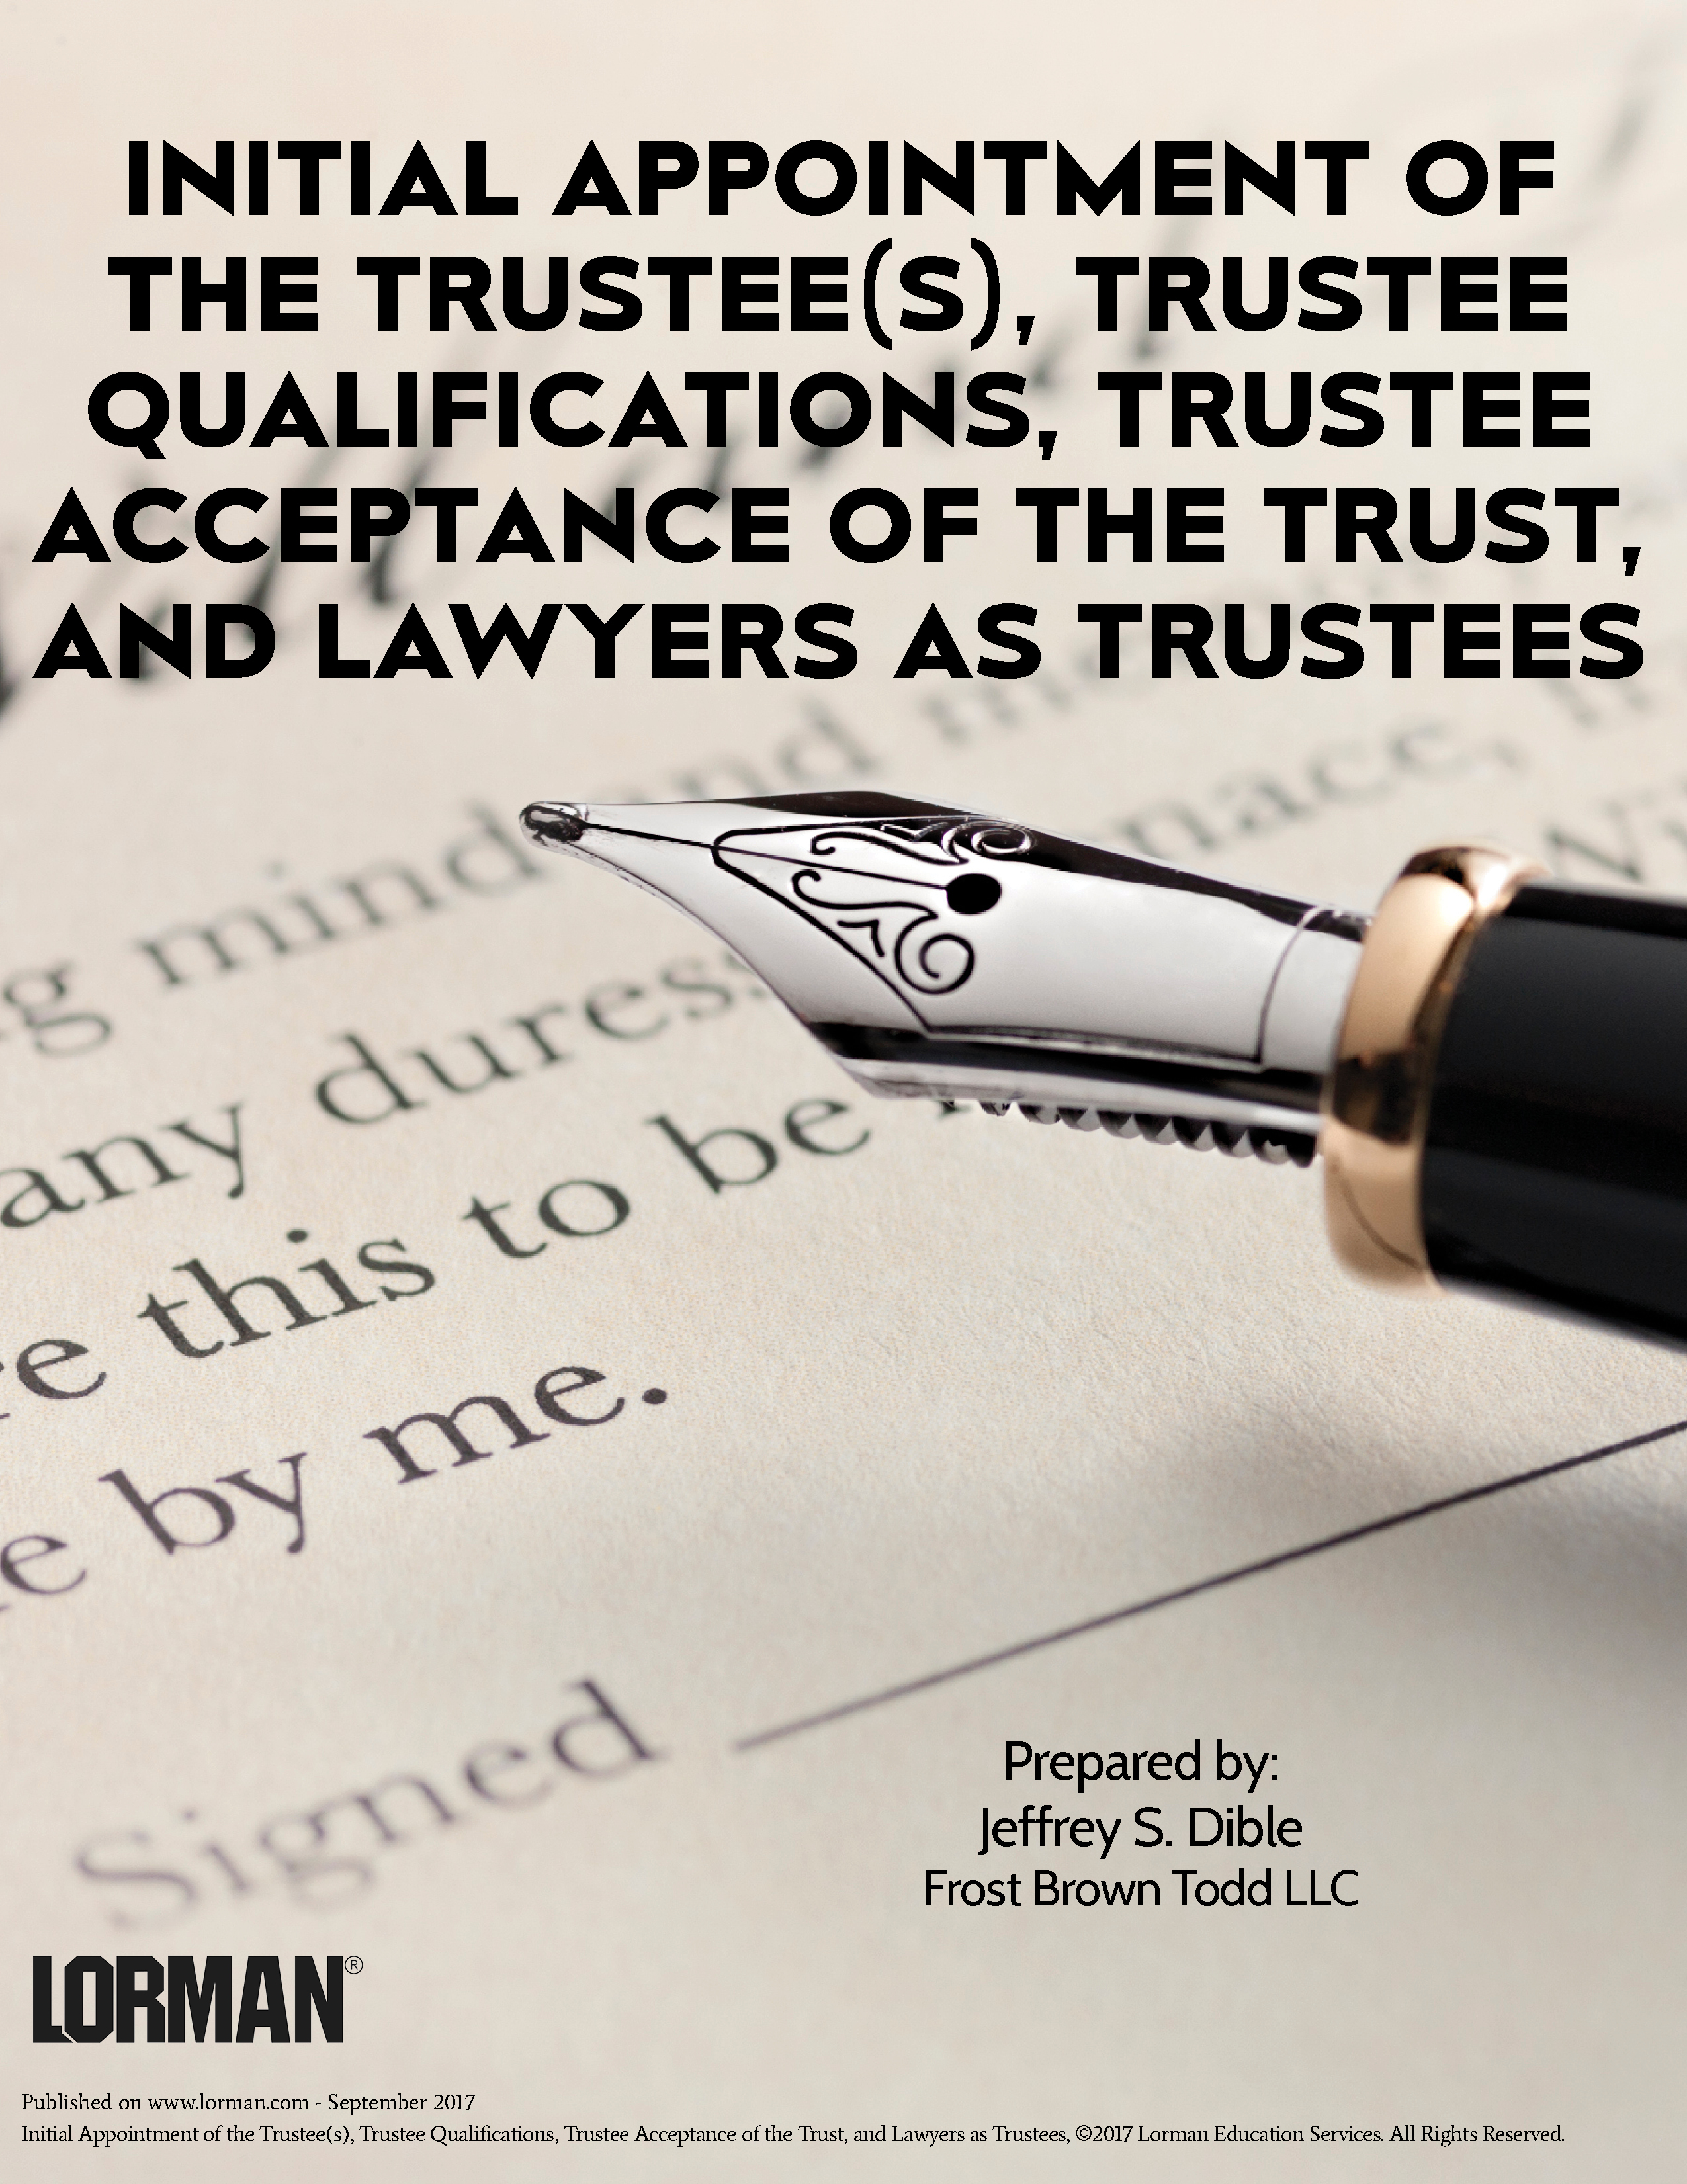 Initial Appointment of the Trustee, and Trustee Qualifications and Acceptance of the Trust